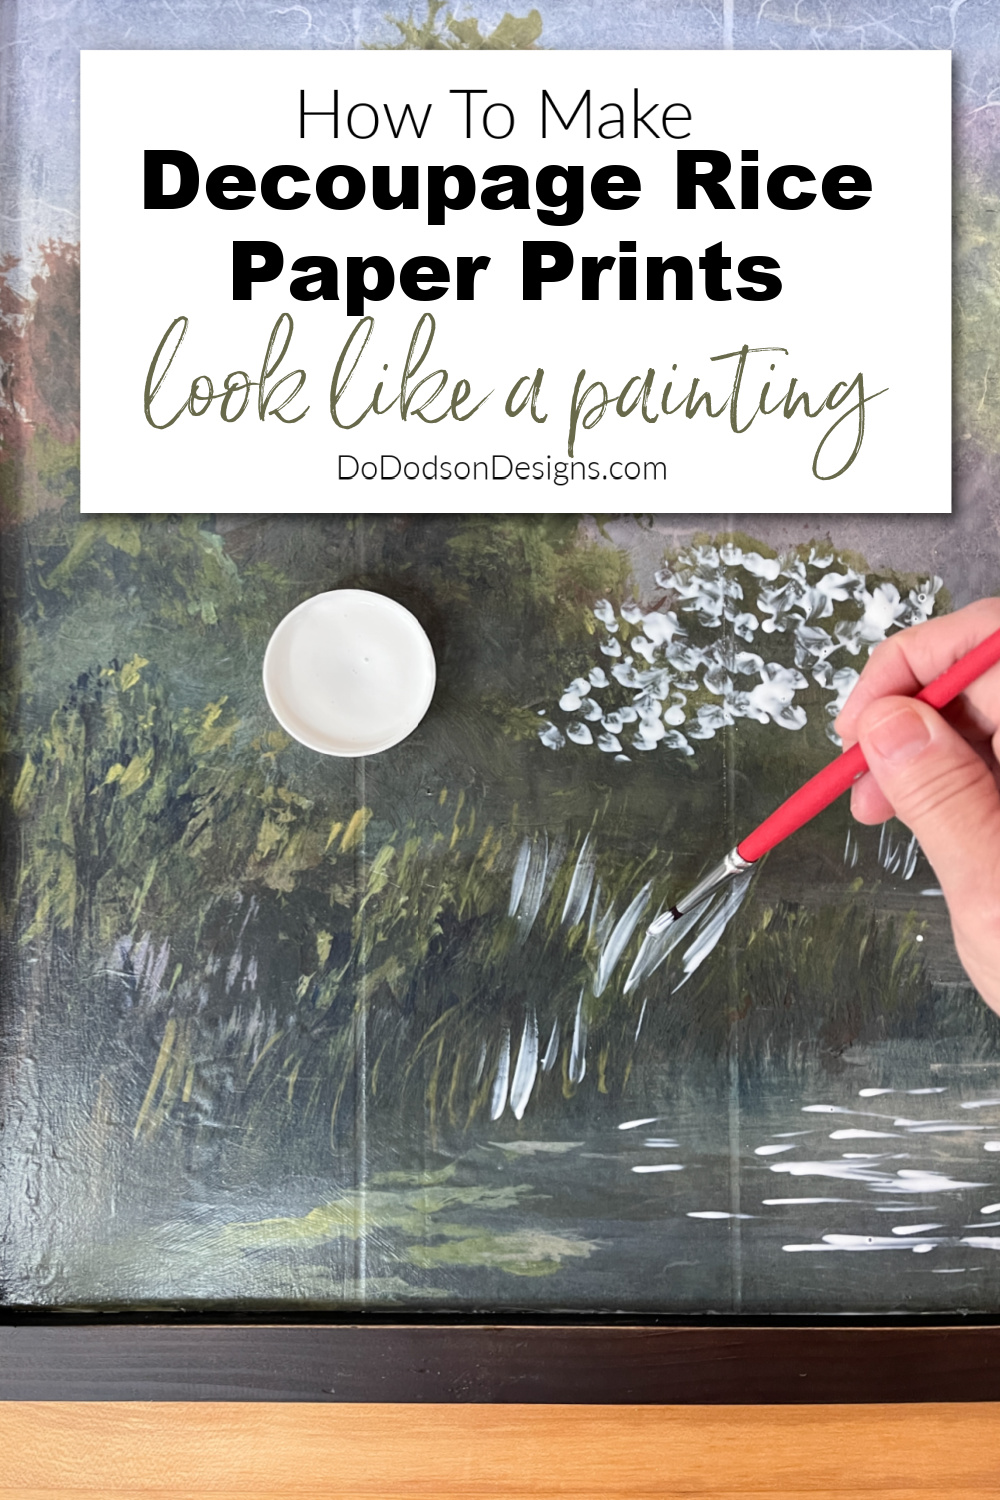 How To Make Decoupage Rice Paper Print Look Like A Painting - Do Dodson  Designs